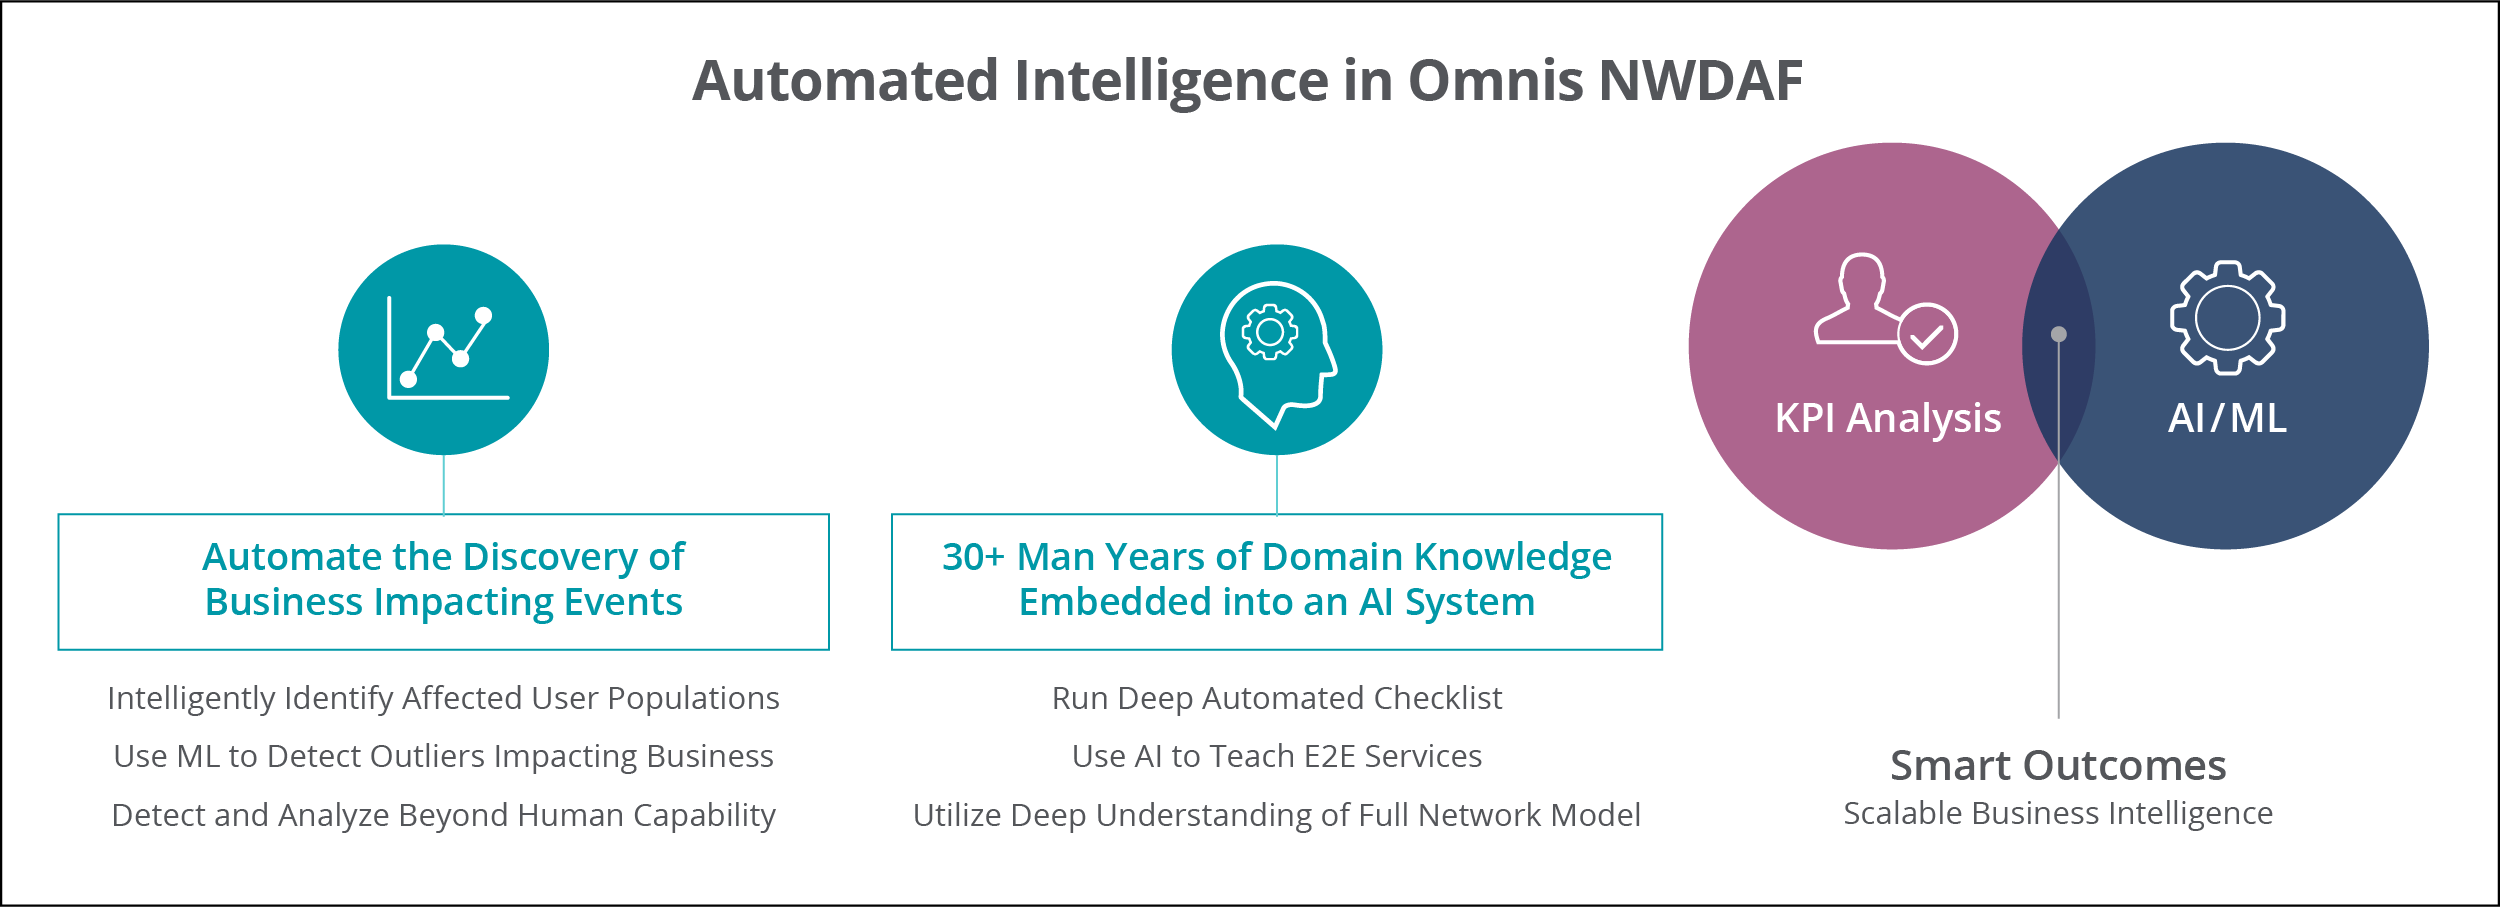 Automated Intelligence in NWDAF